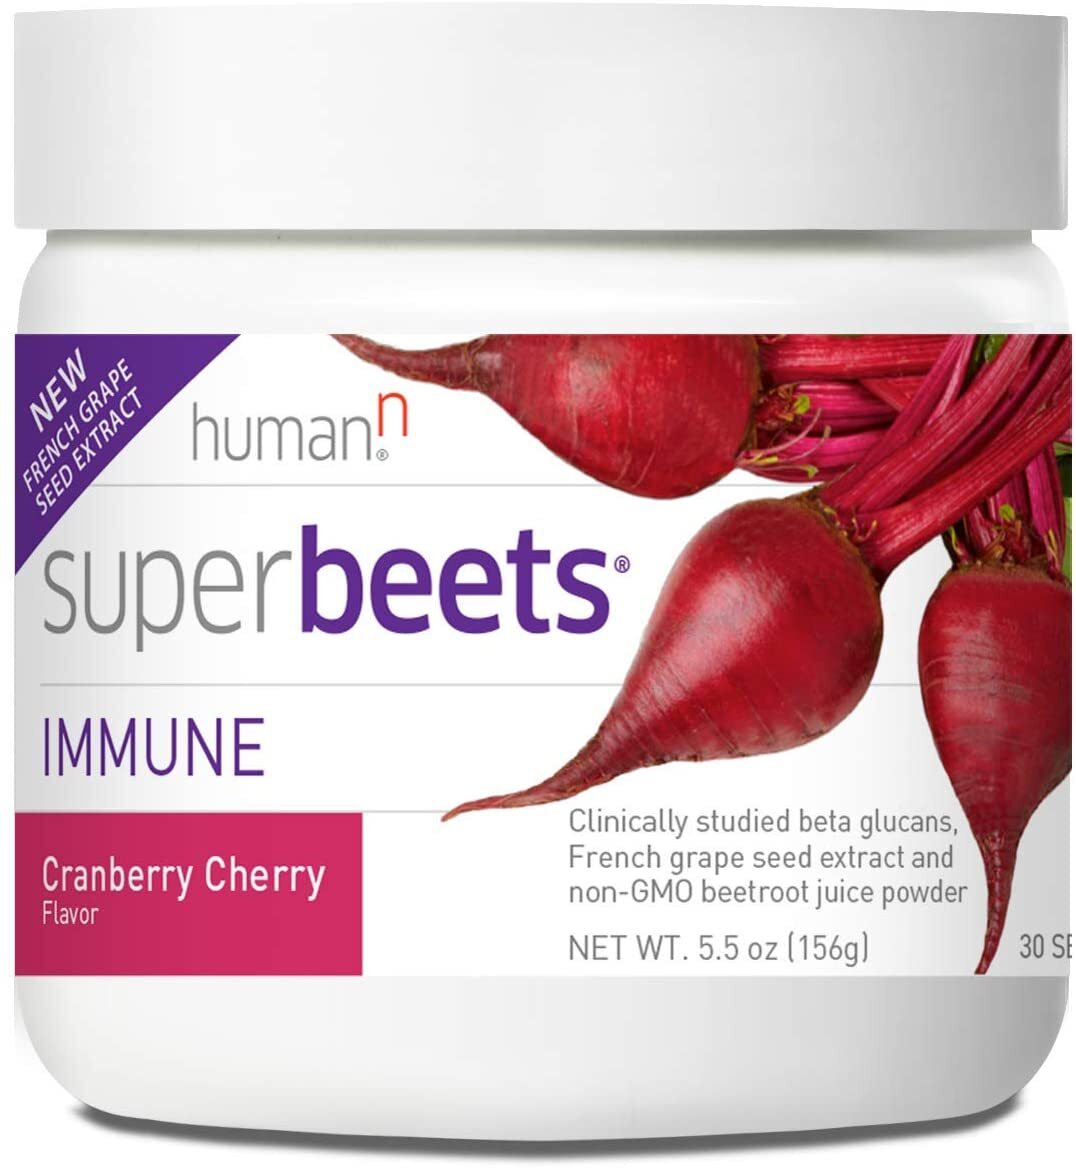 HumanN SuperBeets Immune News & Prices at PricePlow